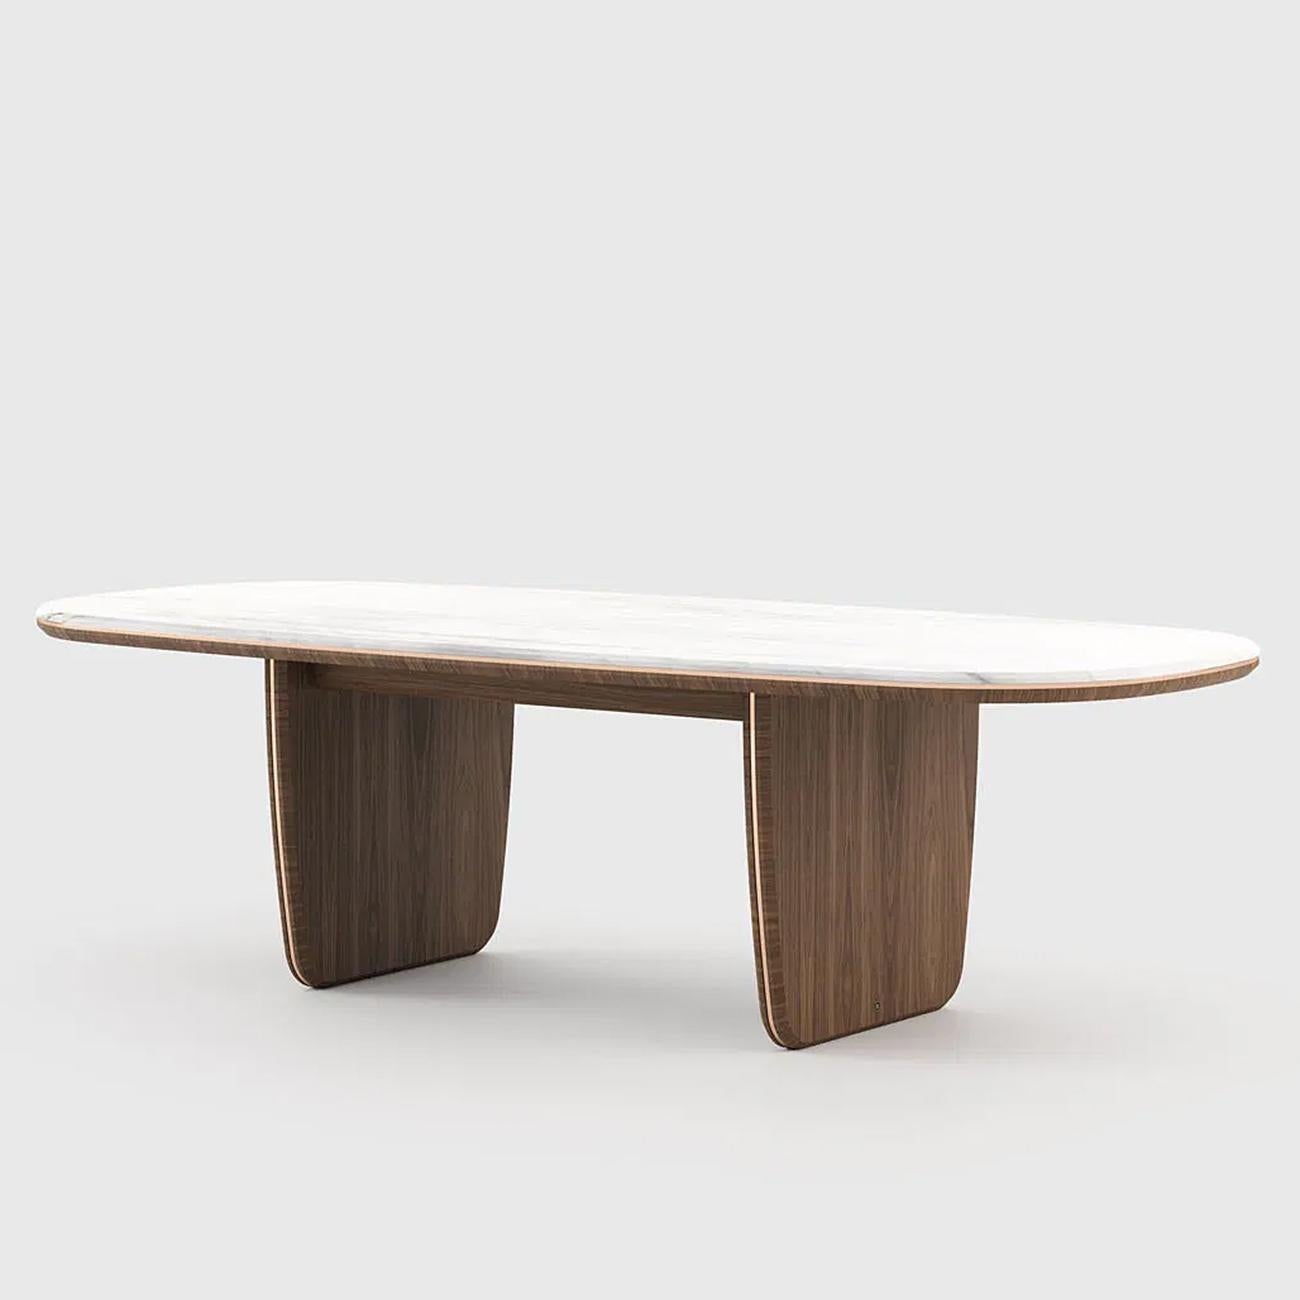 Dining table Carara with structure in matte walnut wood
and with top in walnut wood and Estremoz white marble.
With polished stainless steel trim in gold finish on feet.
Also available in other wooden finishes on request:
in black ash matte, or in